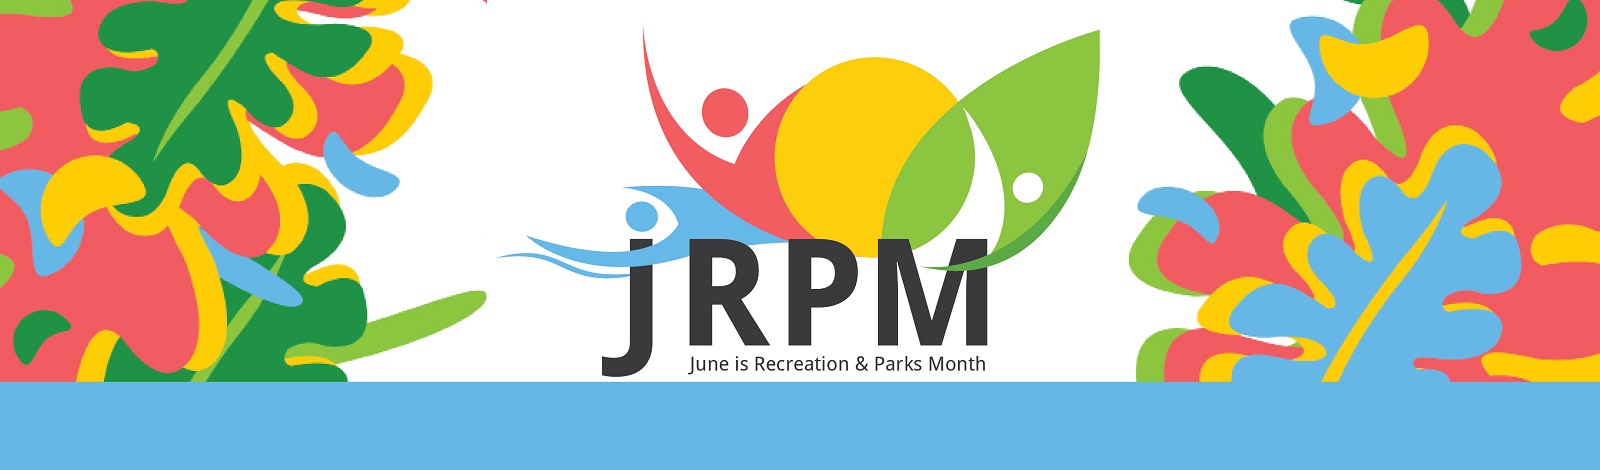 June is recreation and parks month text and images